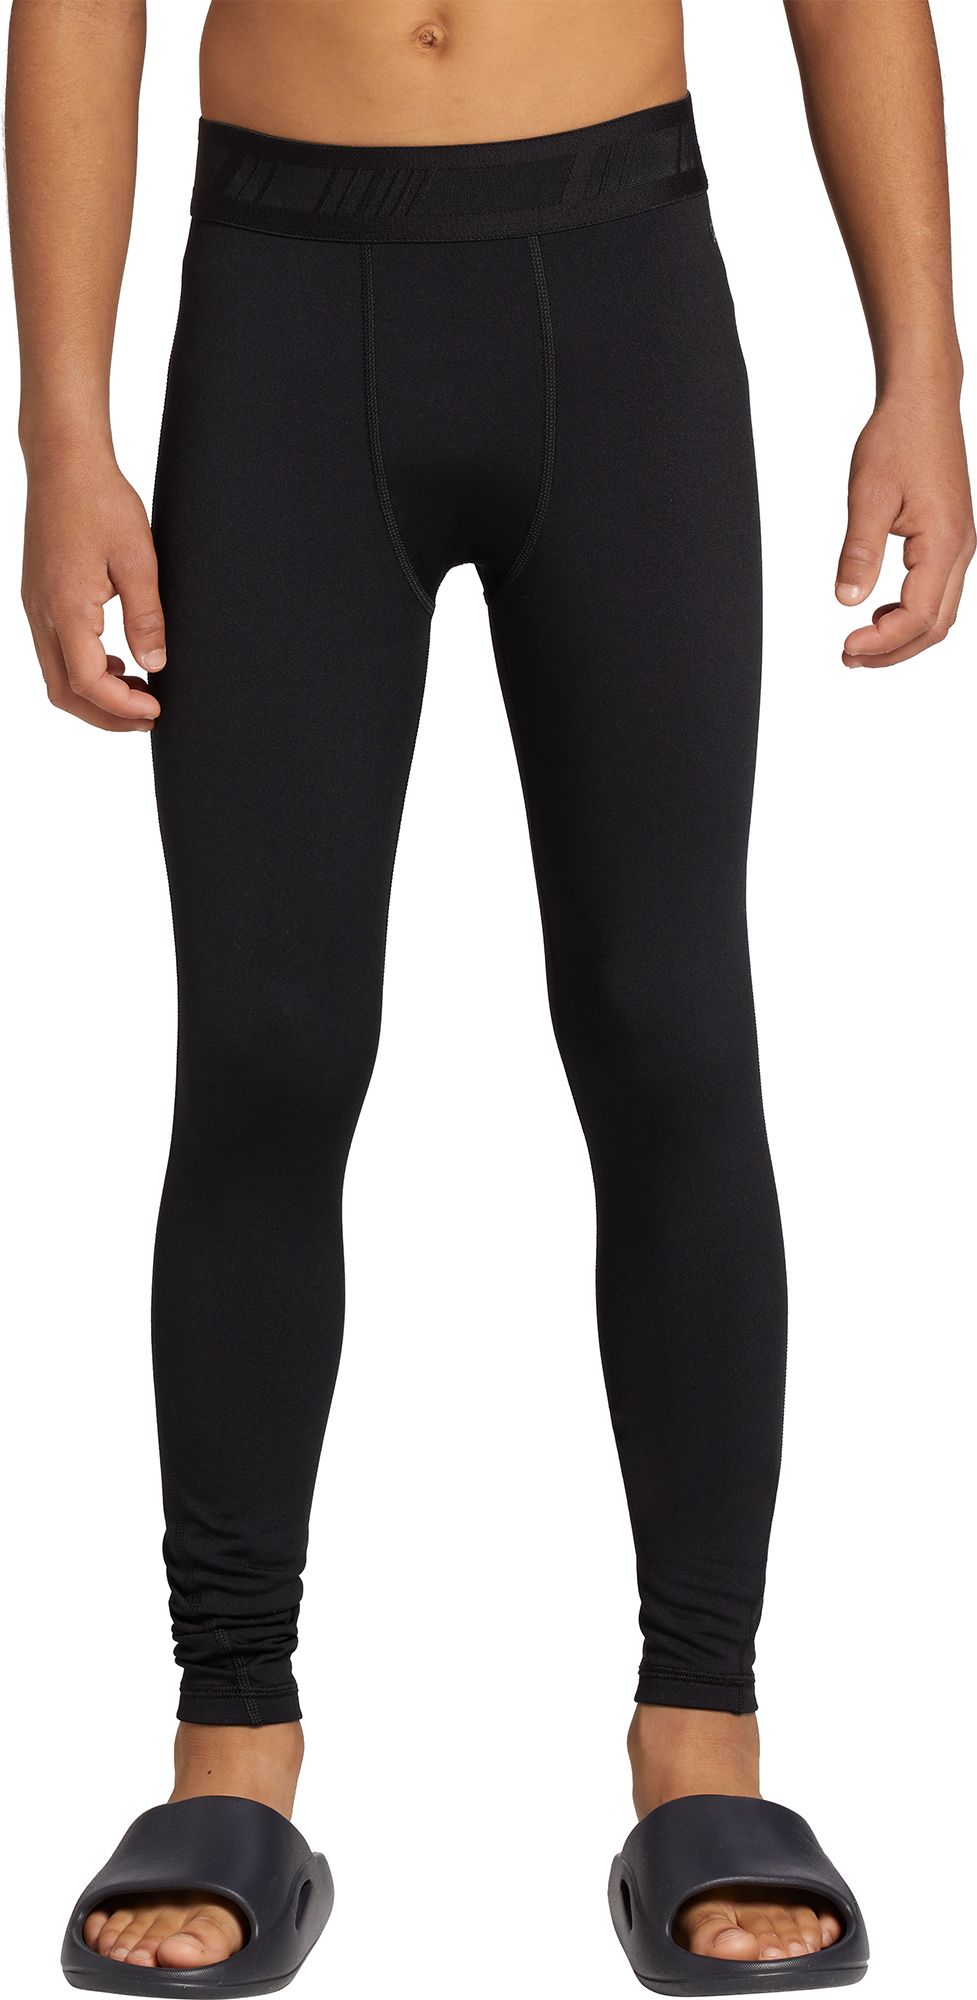 Dick's Sporting Goods DSG Boys' Cold Weather Compression Tights